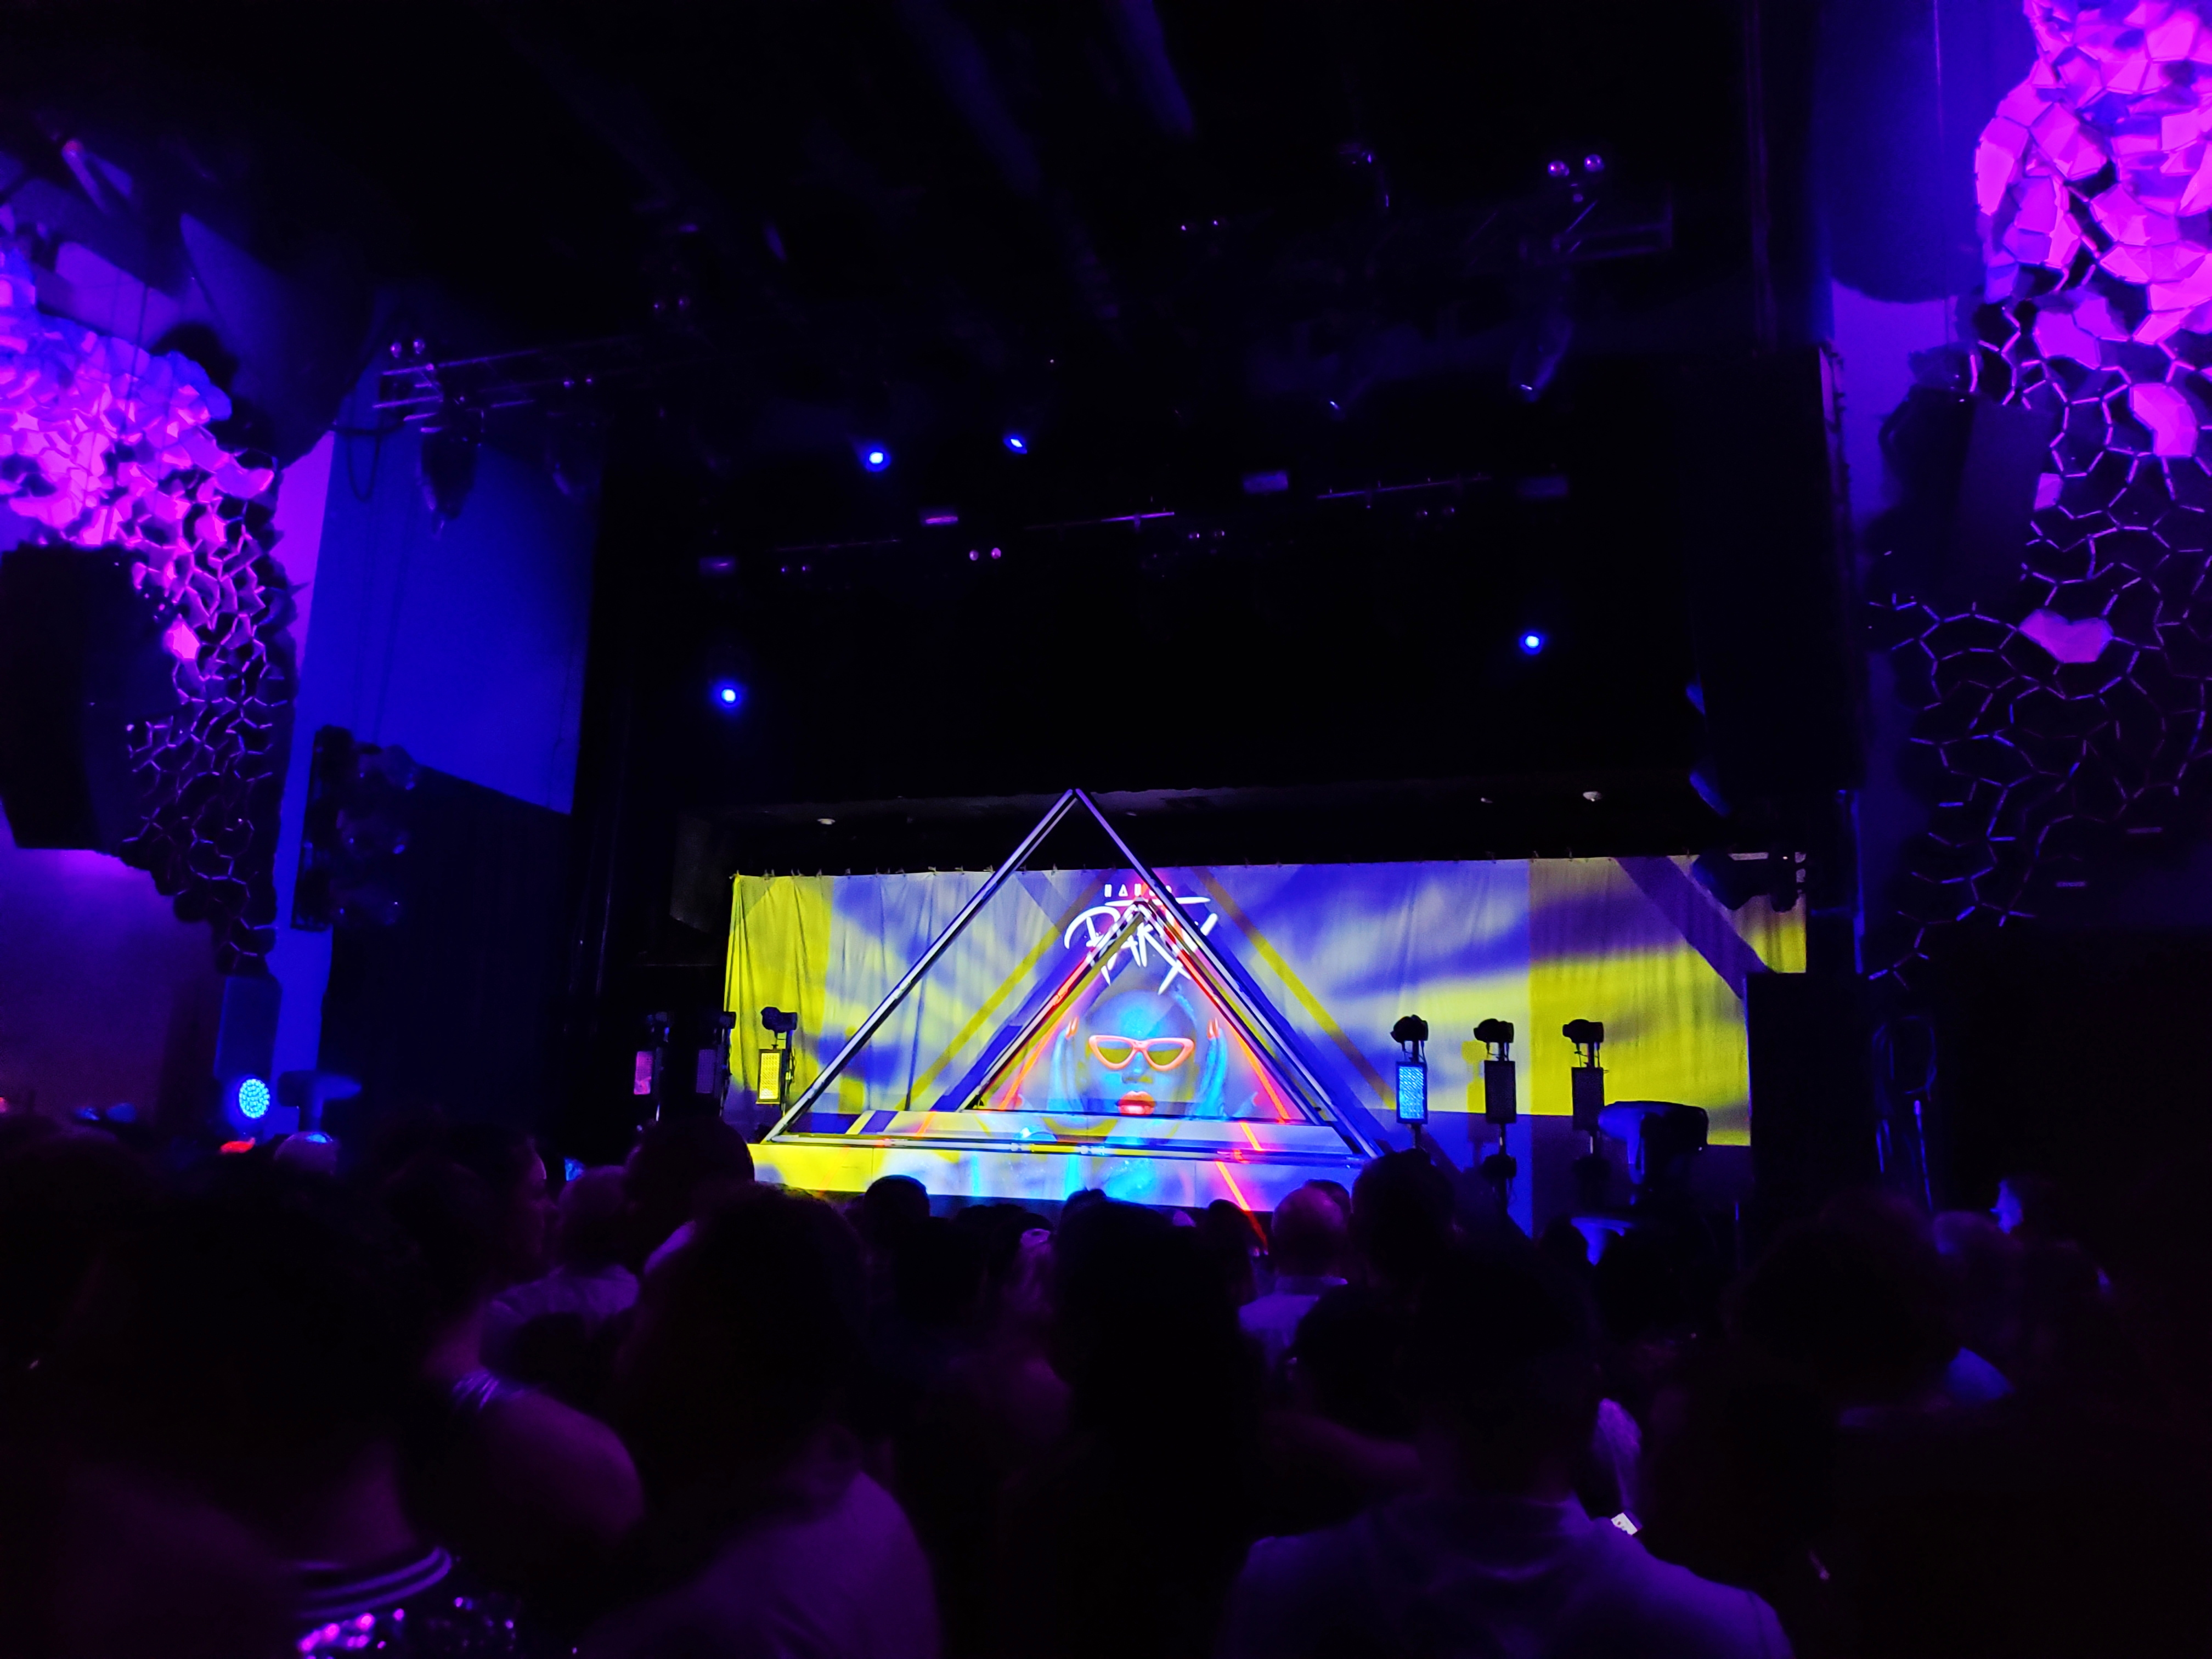 A picture of Emo’s stage. The lighting is purple, and the backdrop on the stage in a picture of Todrick Hall with red lips and sunglasses with the words “Haus Party” written above his head. There are two triangular fixtures on the stage.